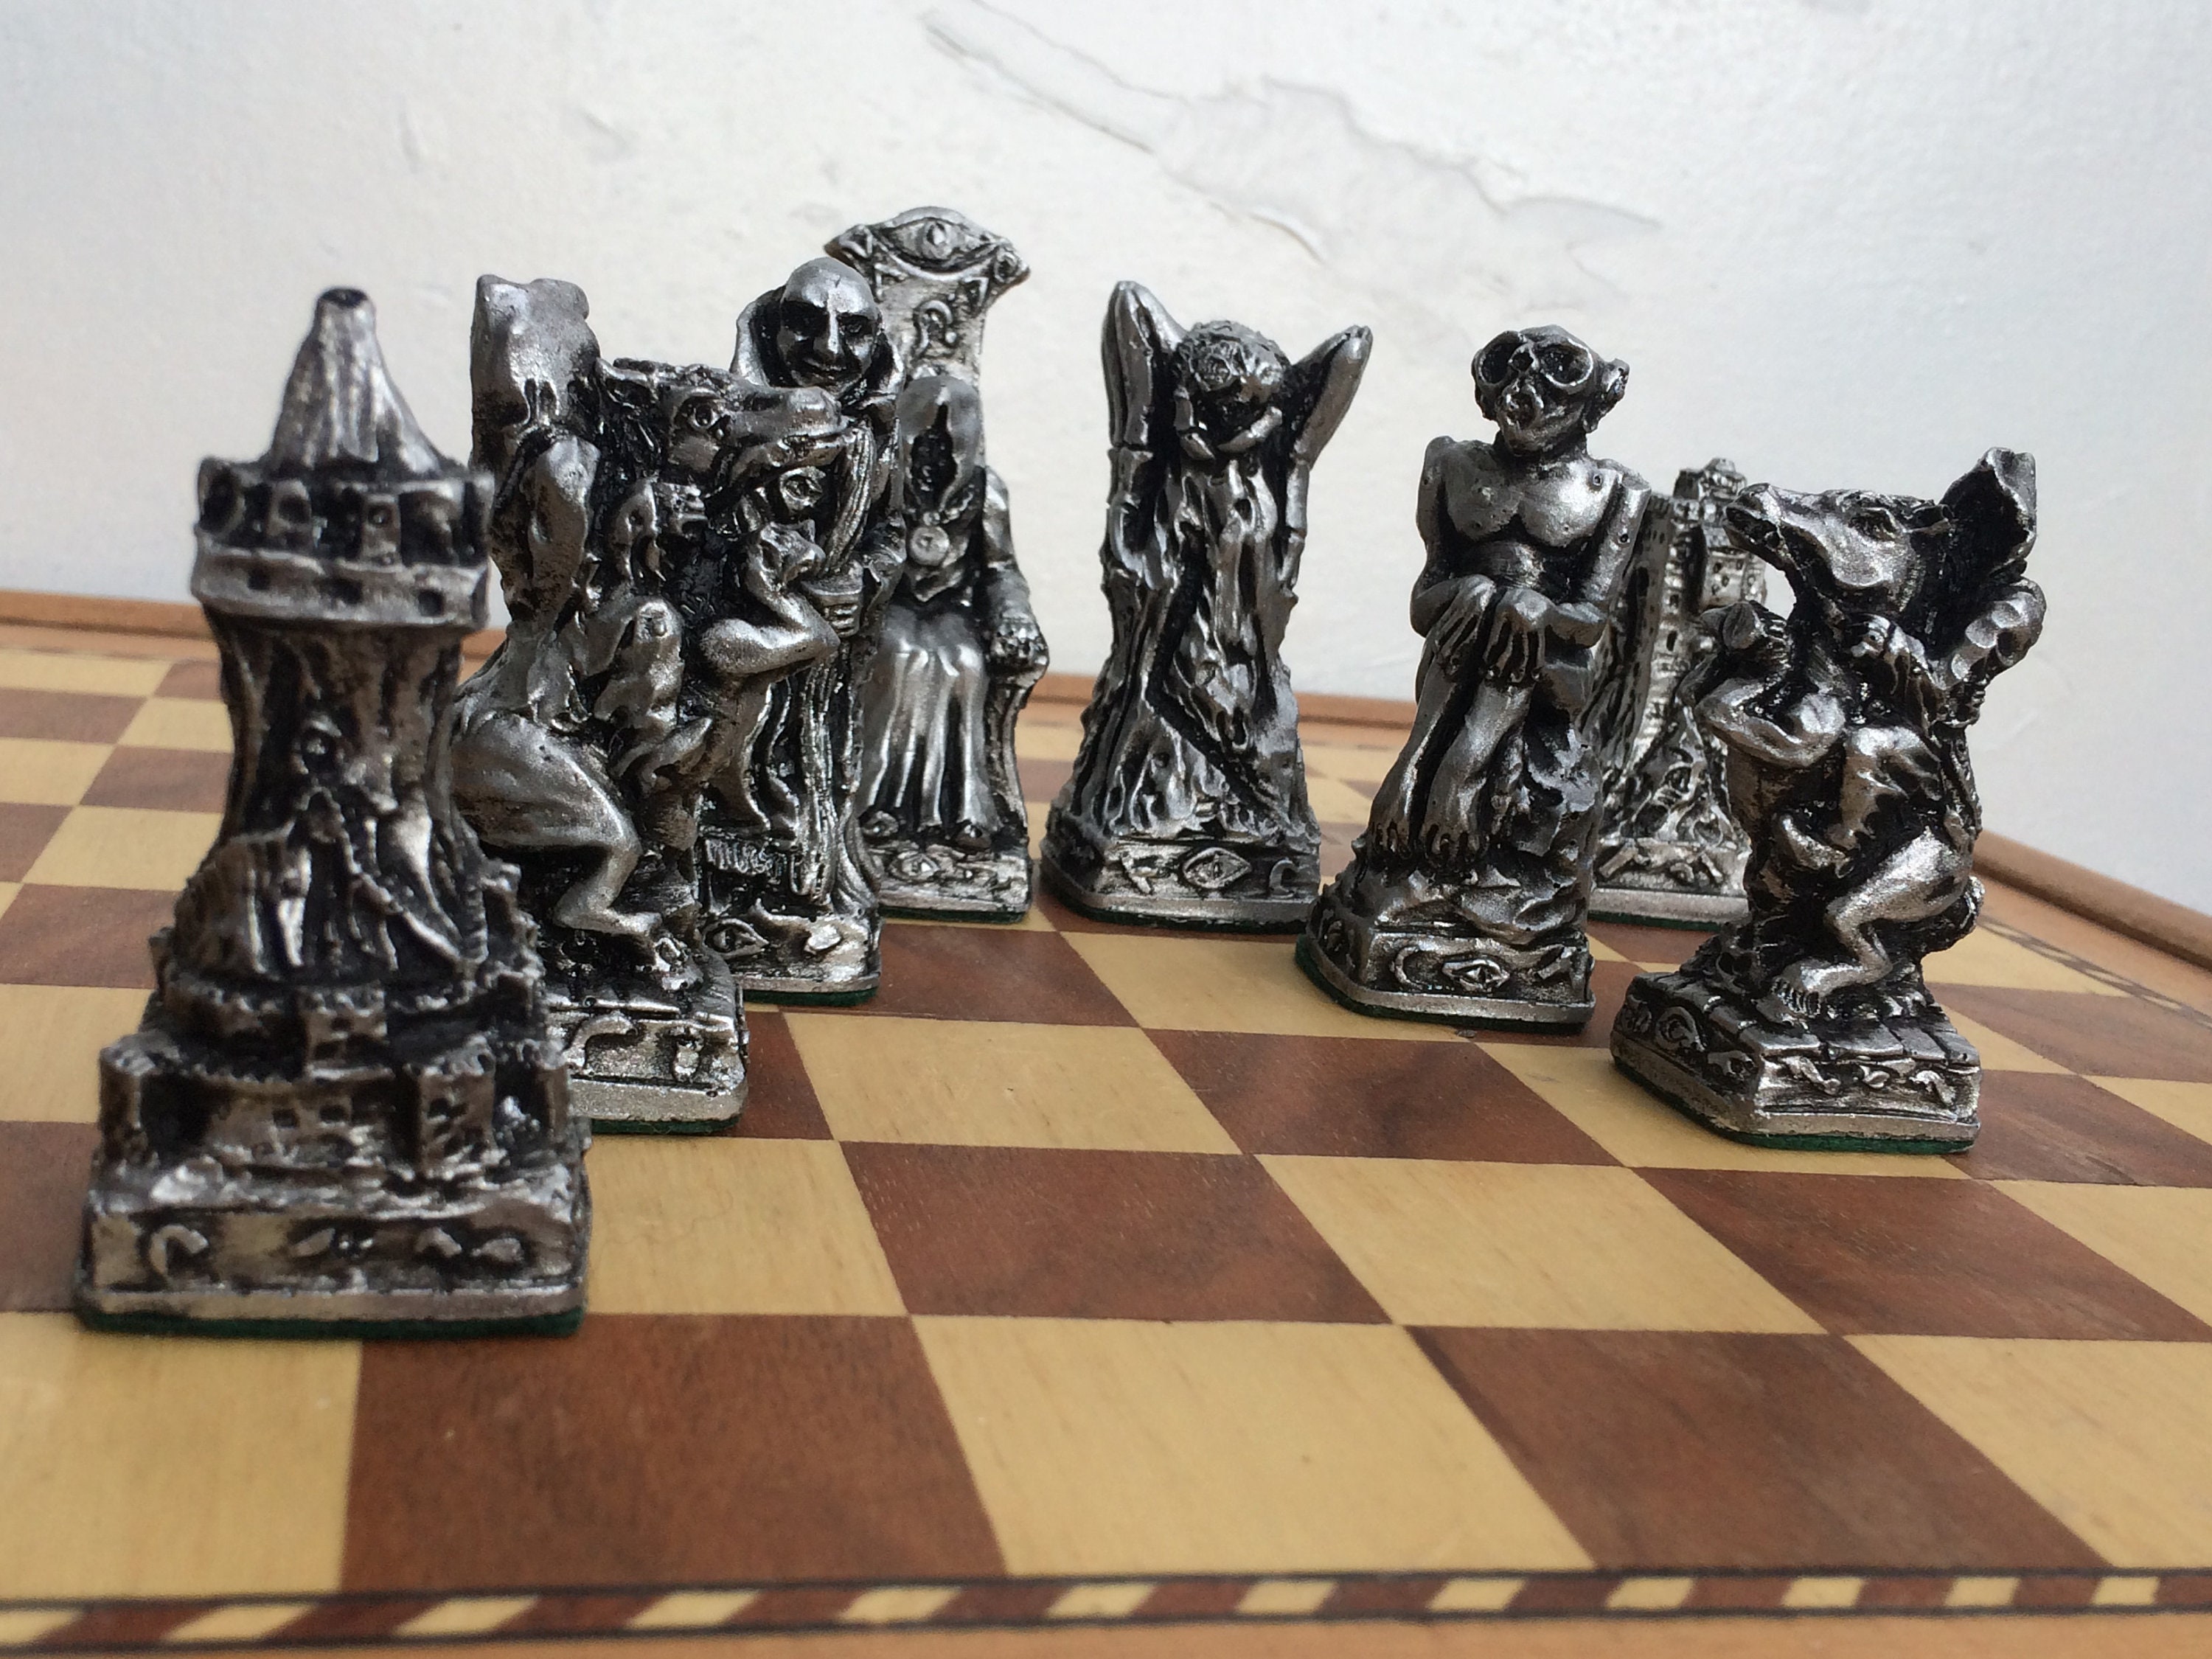 Lord of the Rings Chess Set - LOTR Themed Chess Pieces in Gold and